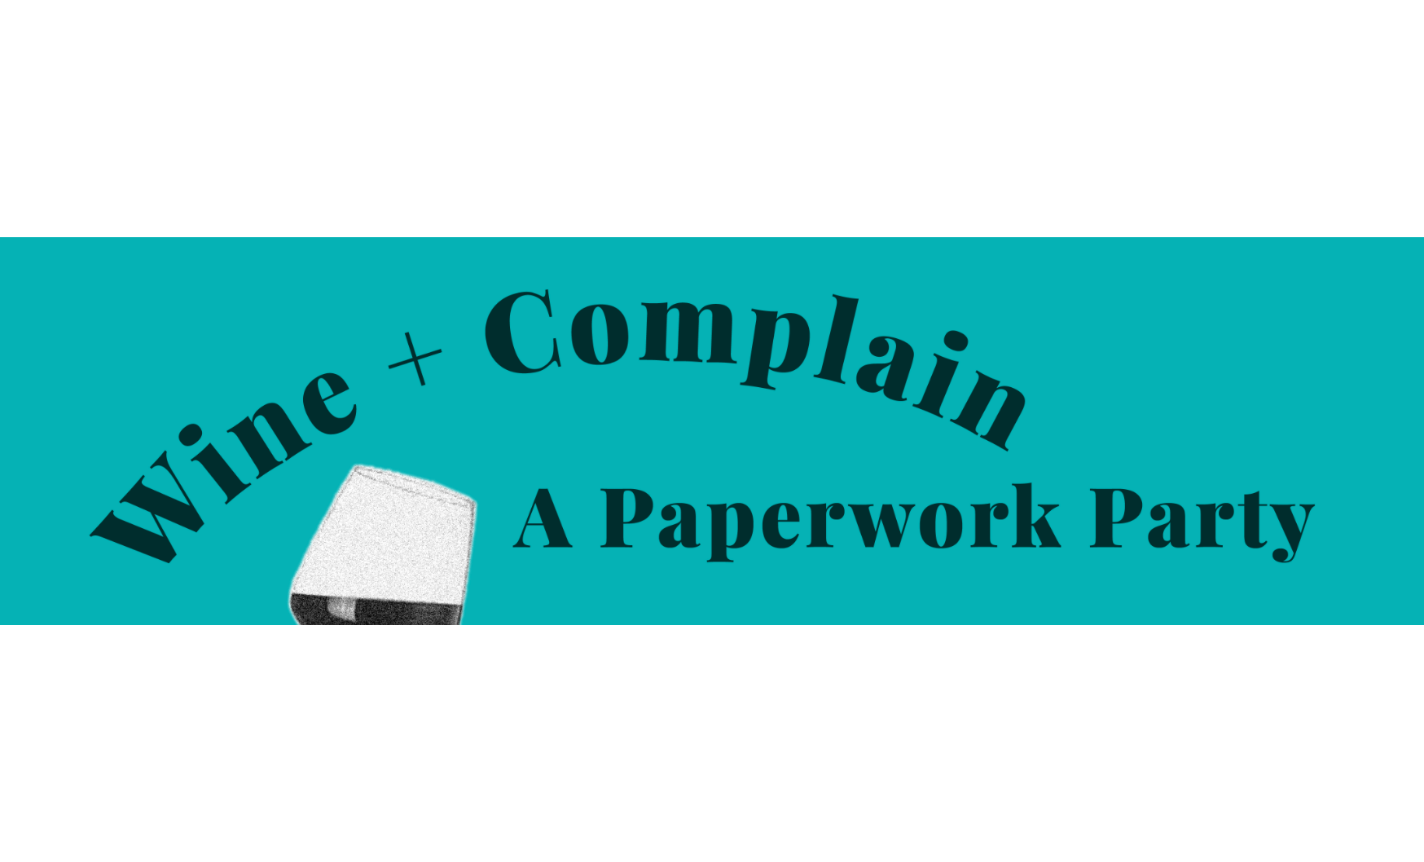 Wine + Complain: A Paperwork Party